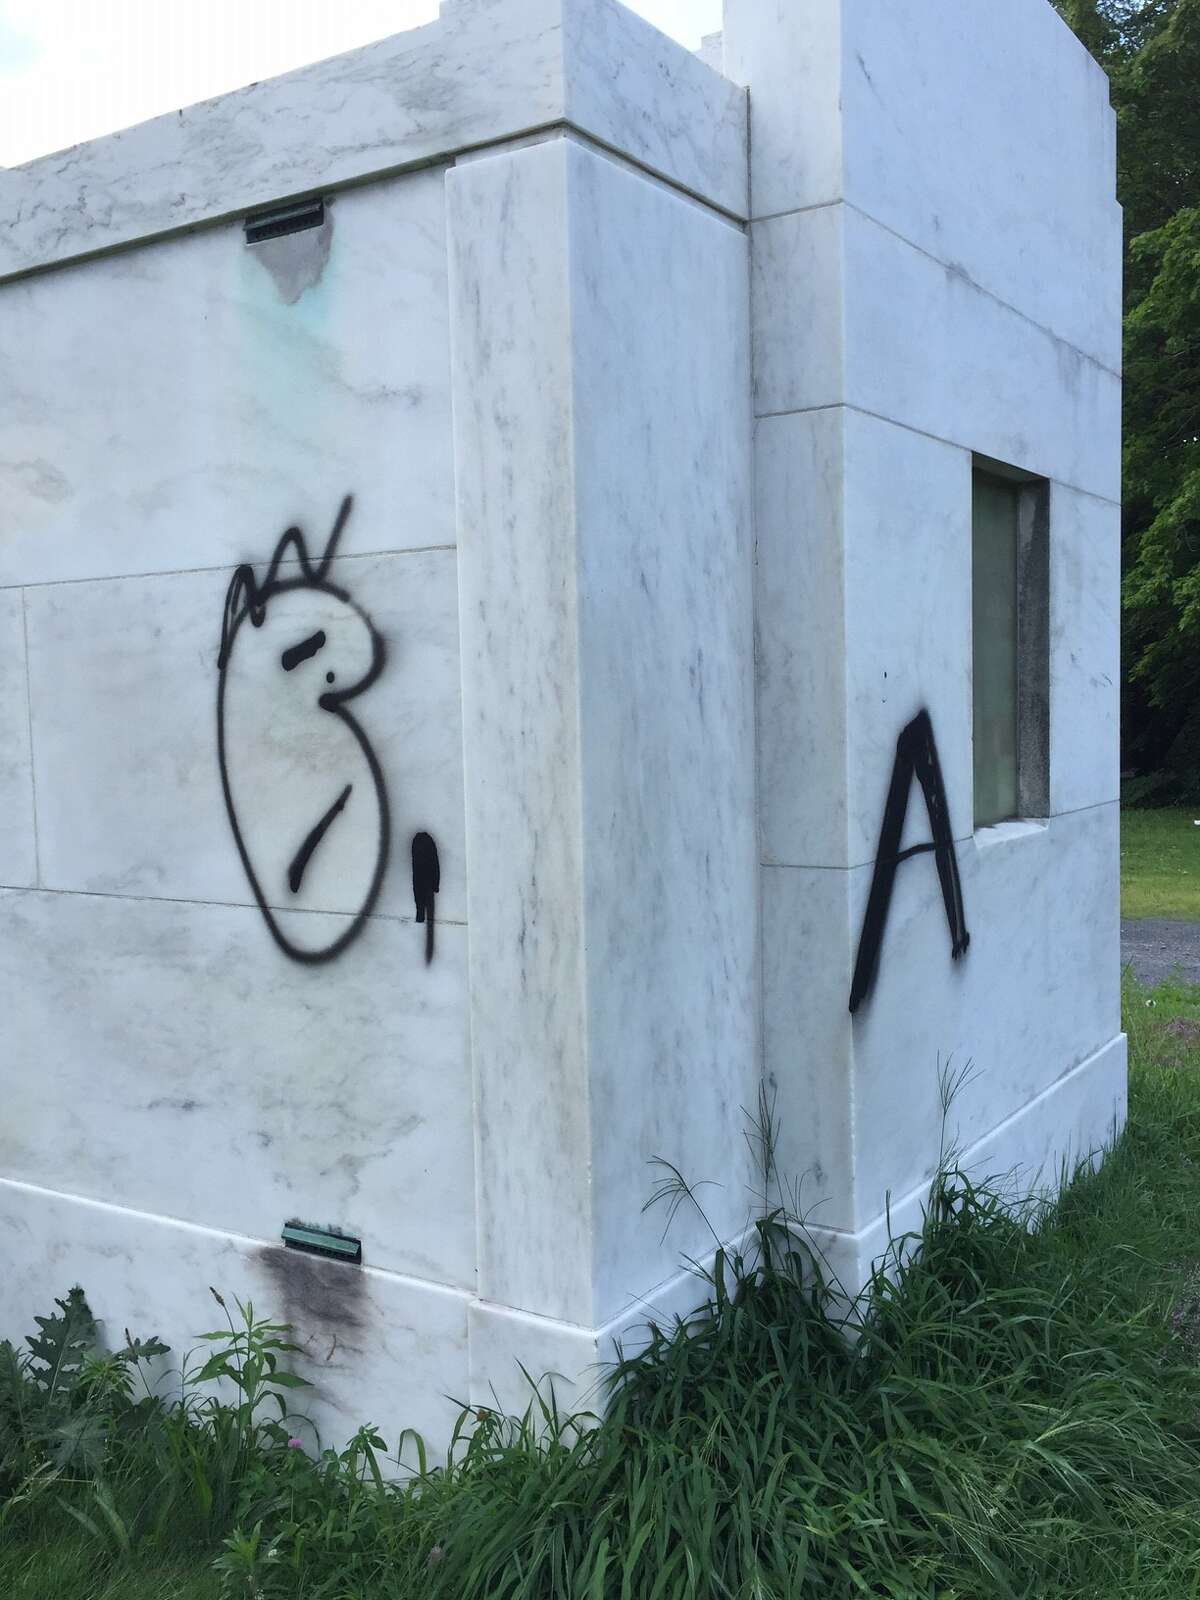 Vandals spray painted these graffiti tags on the Hosler mausoleum in Albany Rural Cemtery over the weekend and Colonie police are investigating, but they don't believe it is a hate crime or any way directed at the Hosler family, who owned Hosler Ice Cream Co. in Albany. (Paul Grondahl / Times Union)